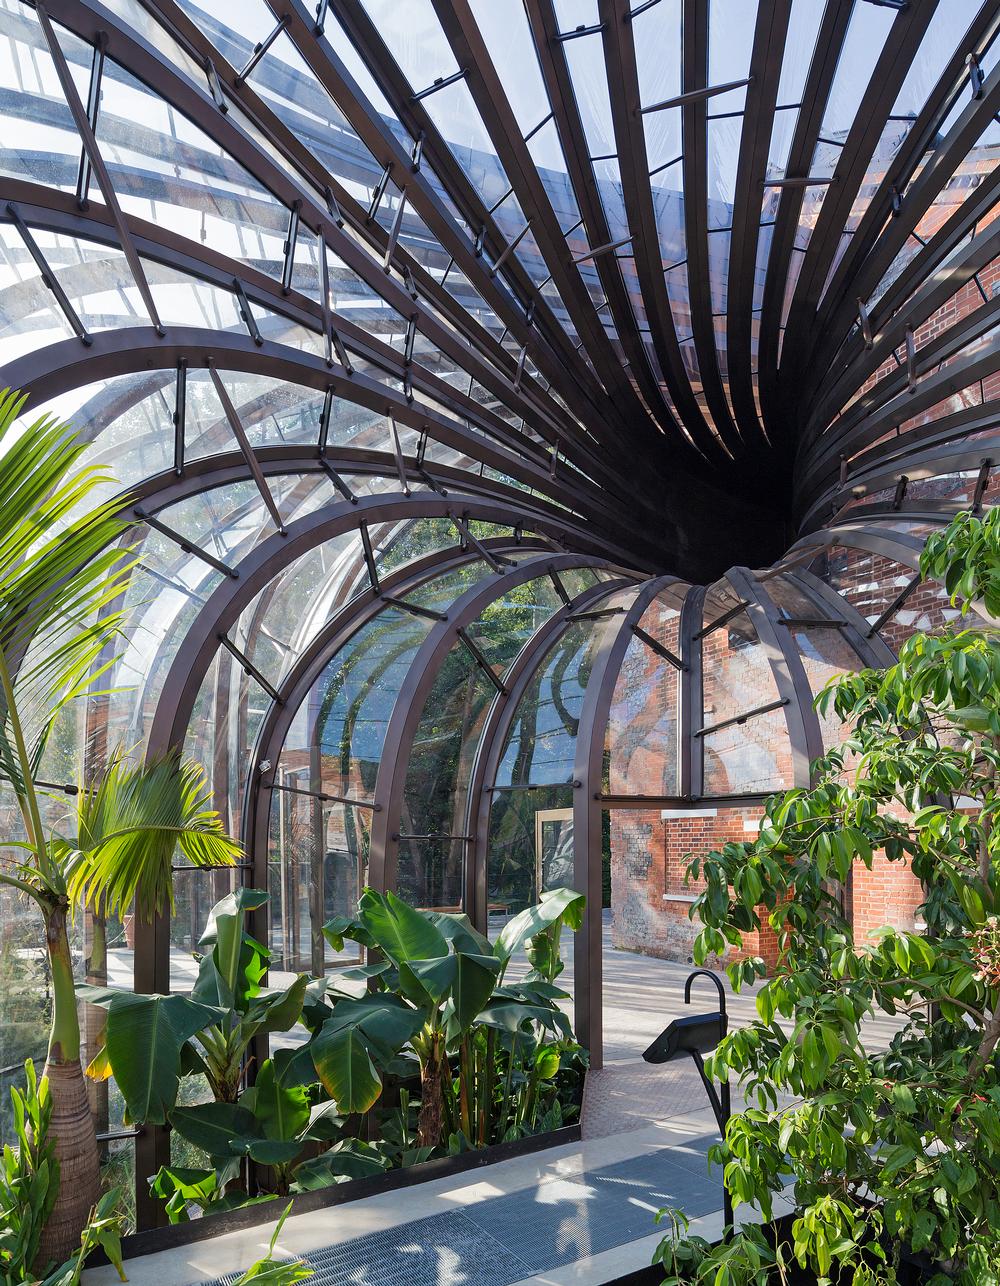 A tropical and a Mediterranean glasshouse house the plant species used in Bombay Sapphire gin / PHOTO: IWAN BAAN